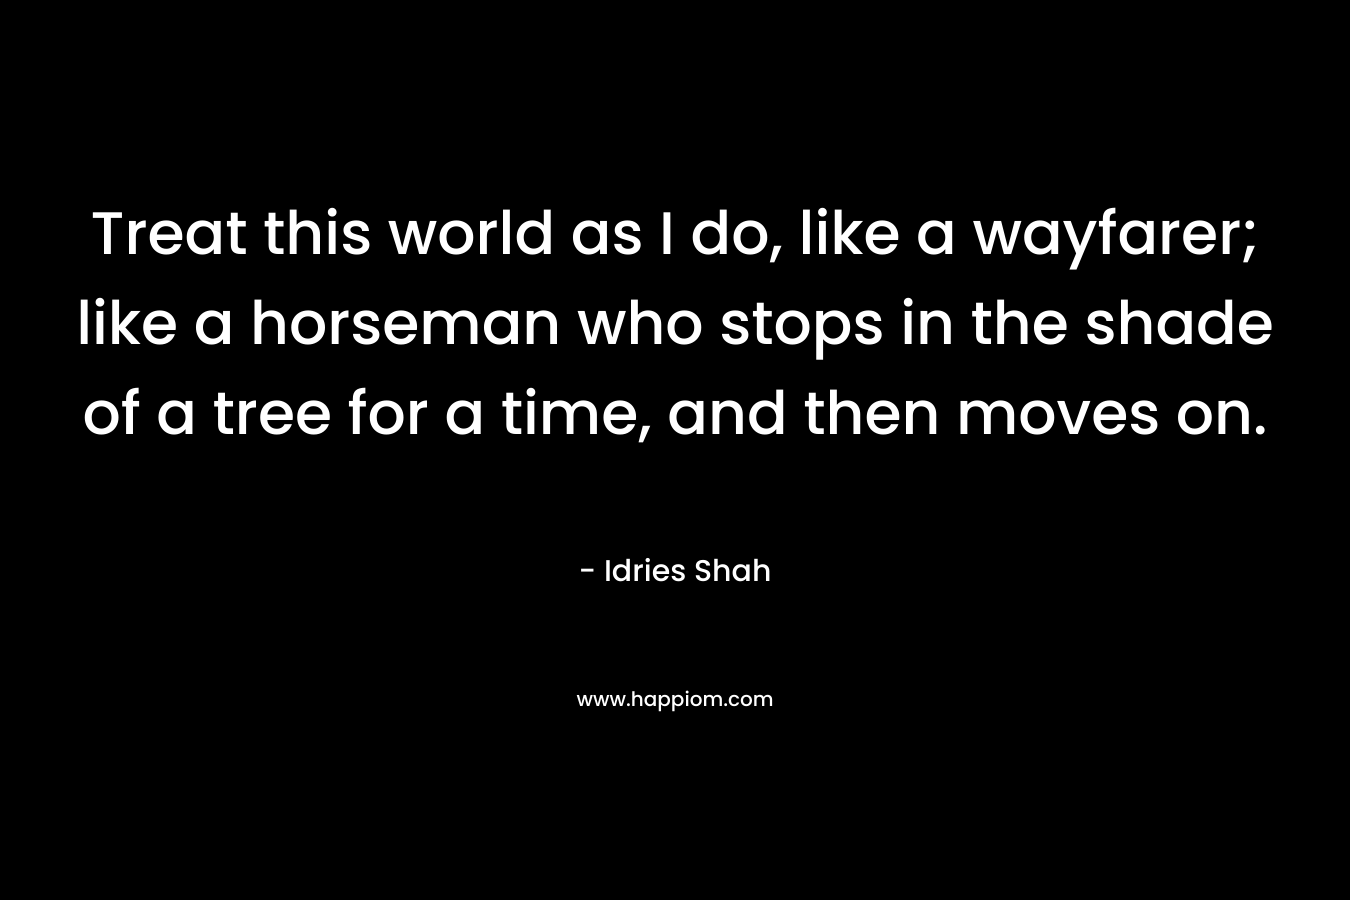 Treat this world as I do, like a wayfarer; like a horseman who stops in the shade of a tree for a time, and then moves on.